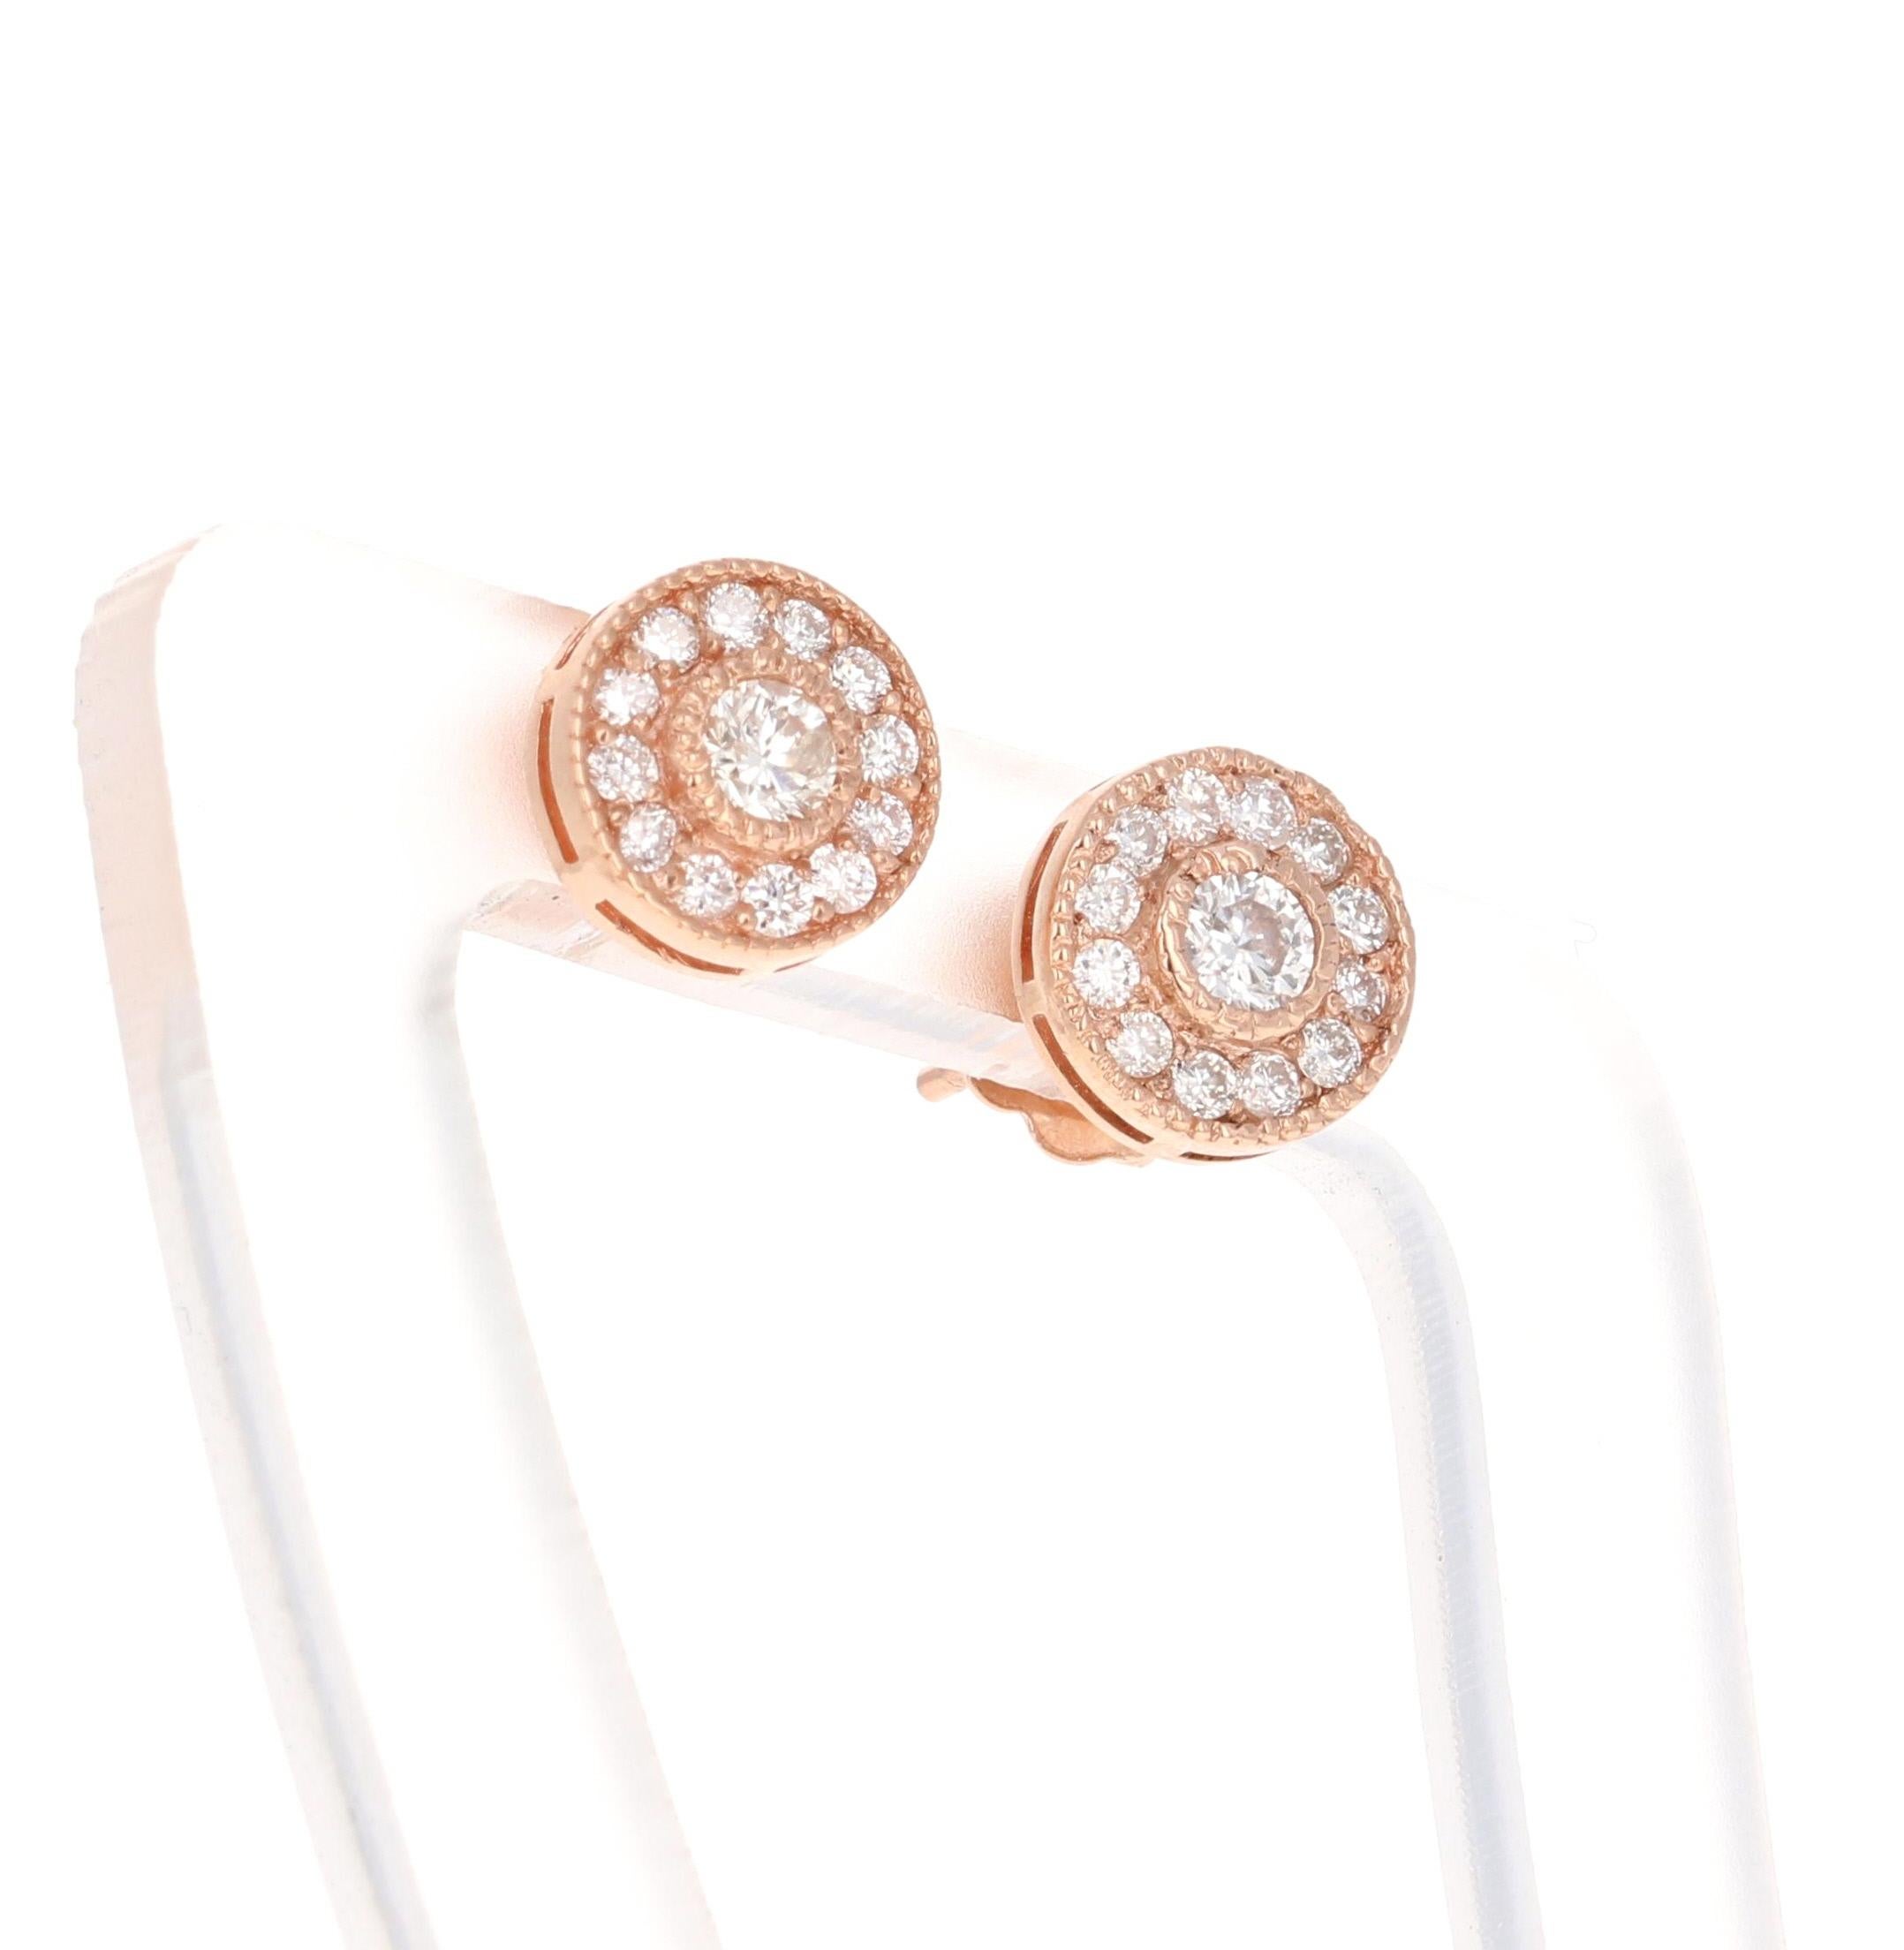 This unqiue design of diamond earrings has 26 Round Cut Diamonds that have 0.41 carats and a clarity and color of VS-H. 
They are set in 14 Karat Rose Gold and weigh 1.5 grams

The width of the earrings are 8.5 mm. 



